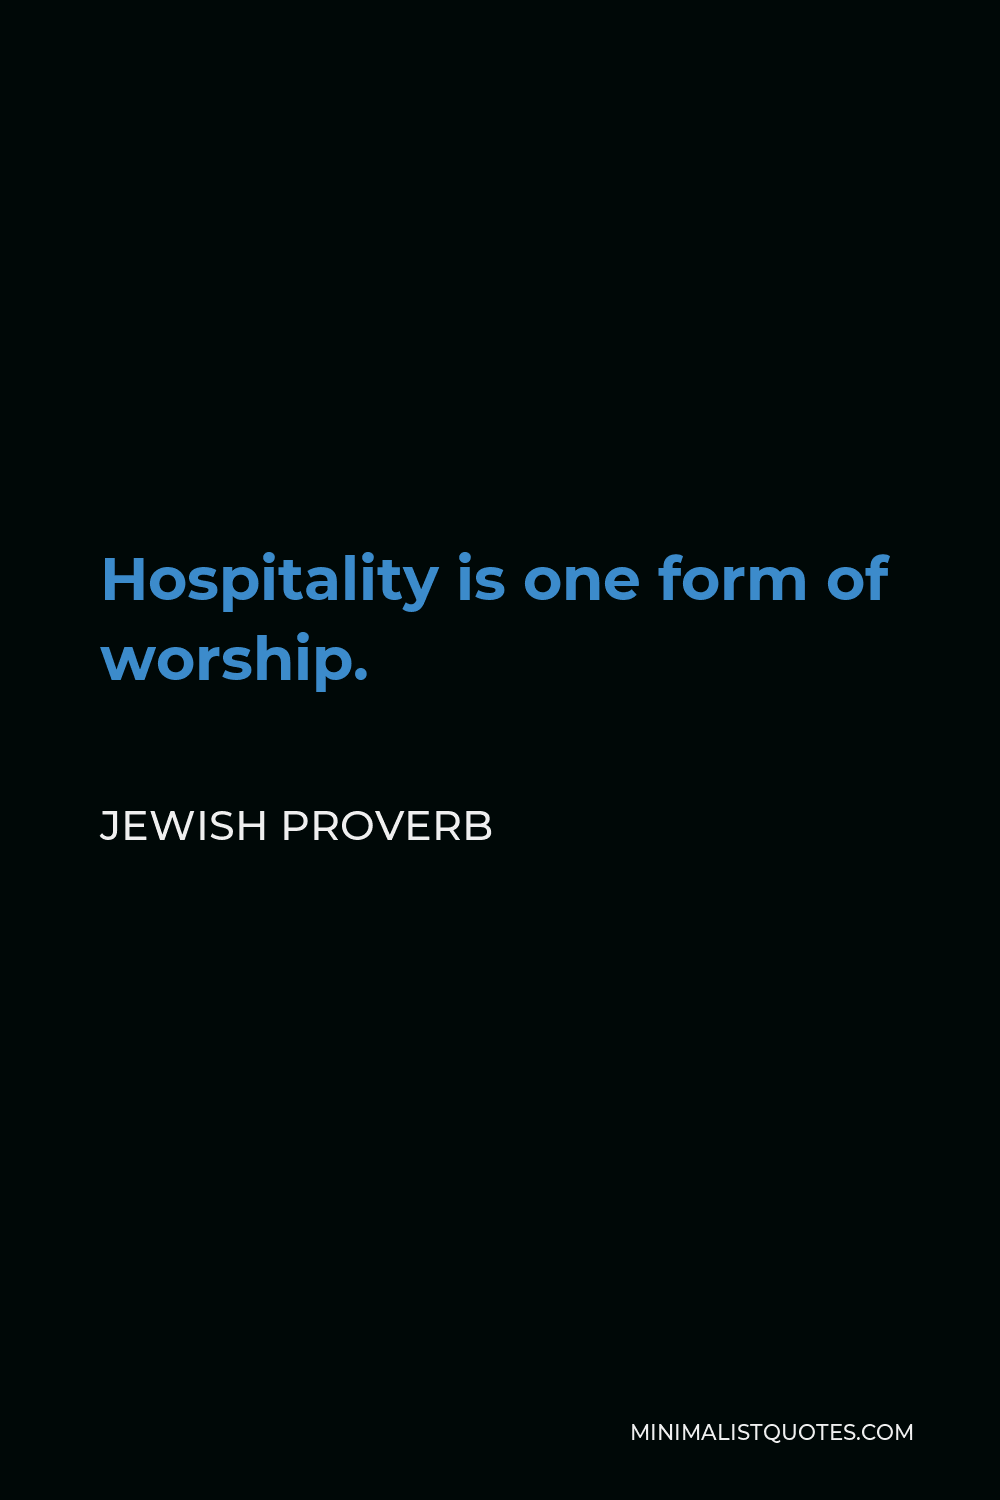 Jewish Proverb Quote - Hospitality is one form of worship.